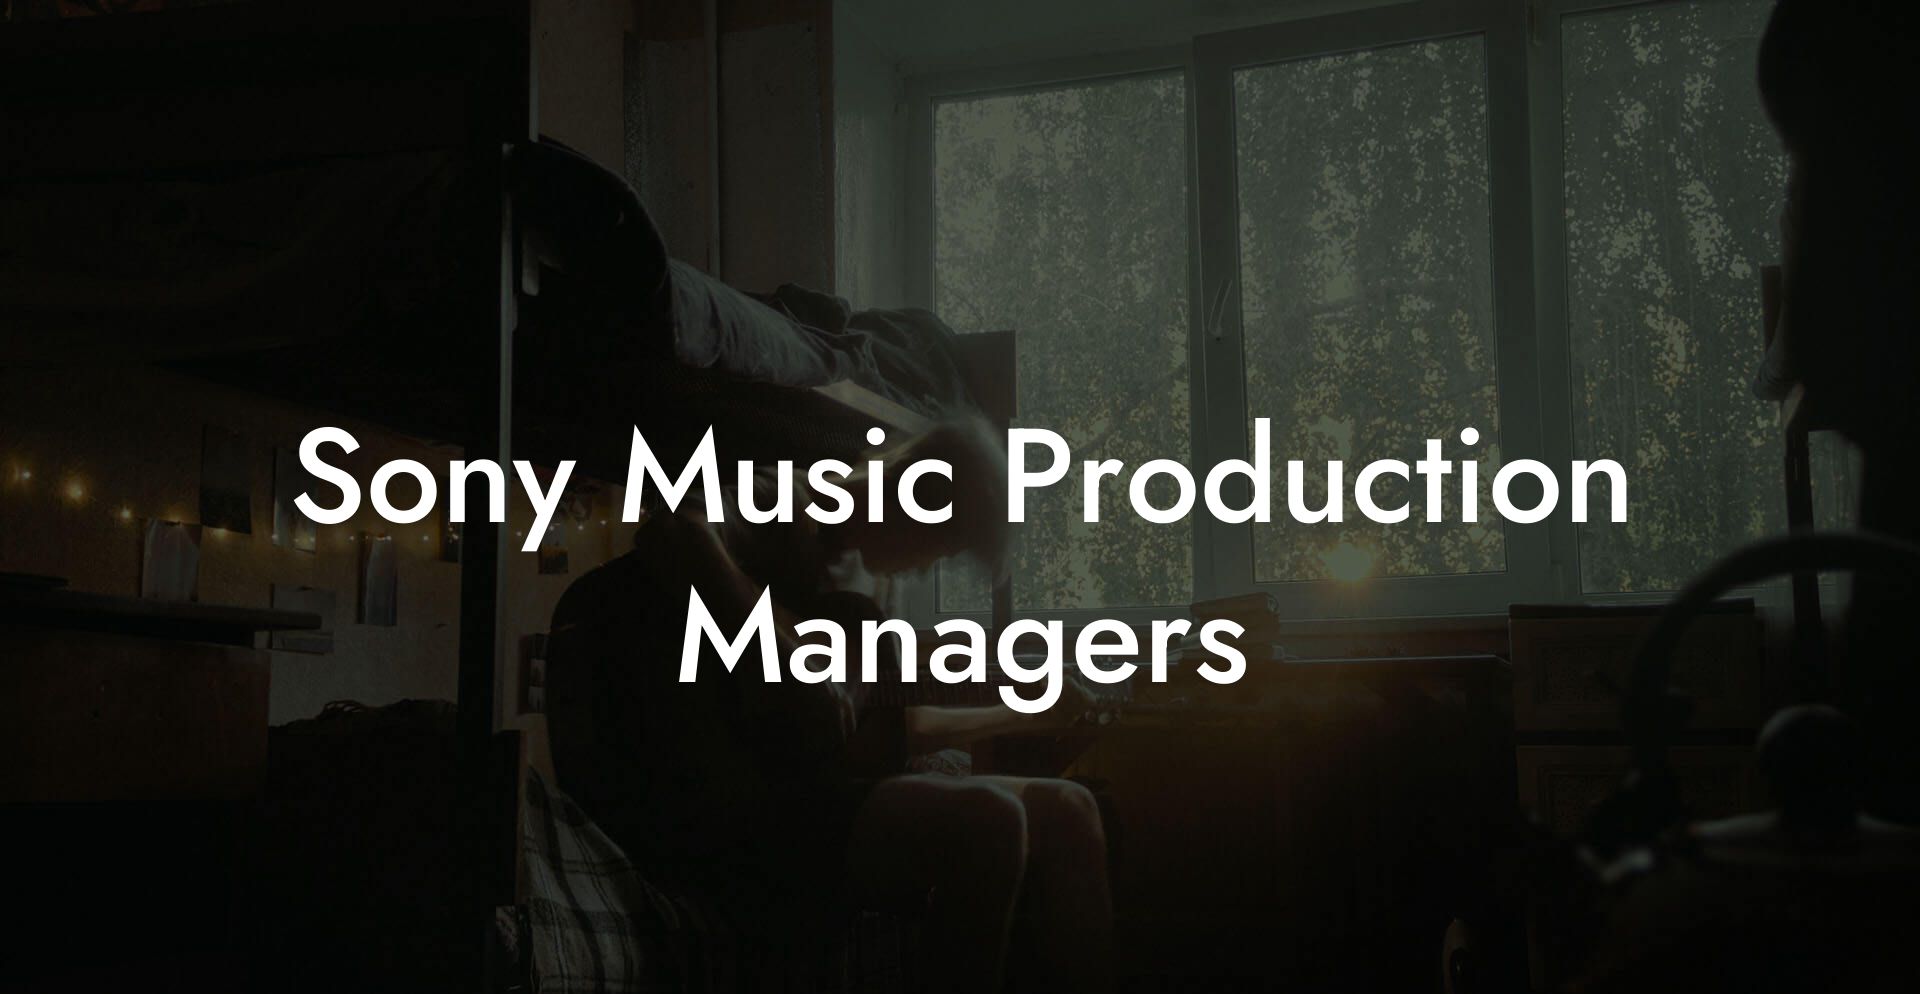 Sony Music Production Managers